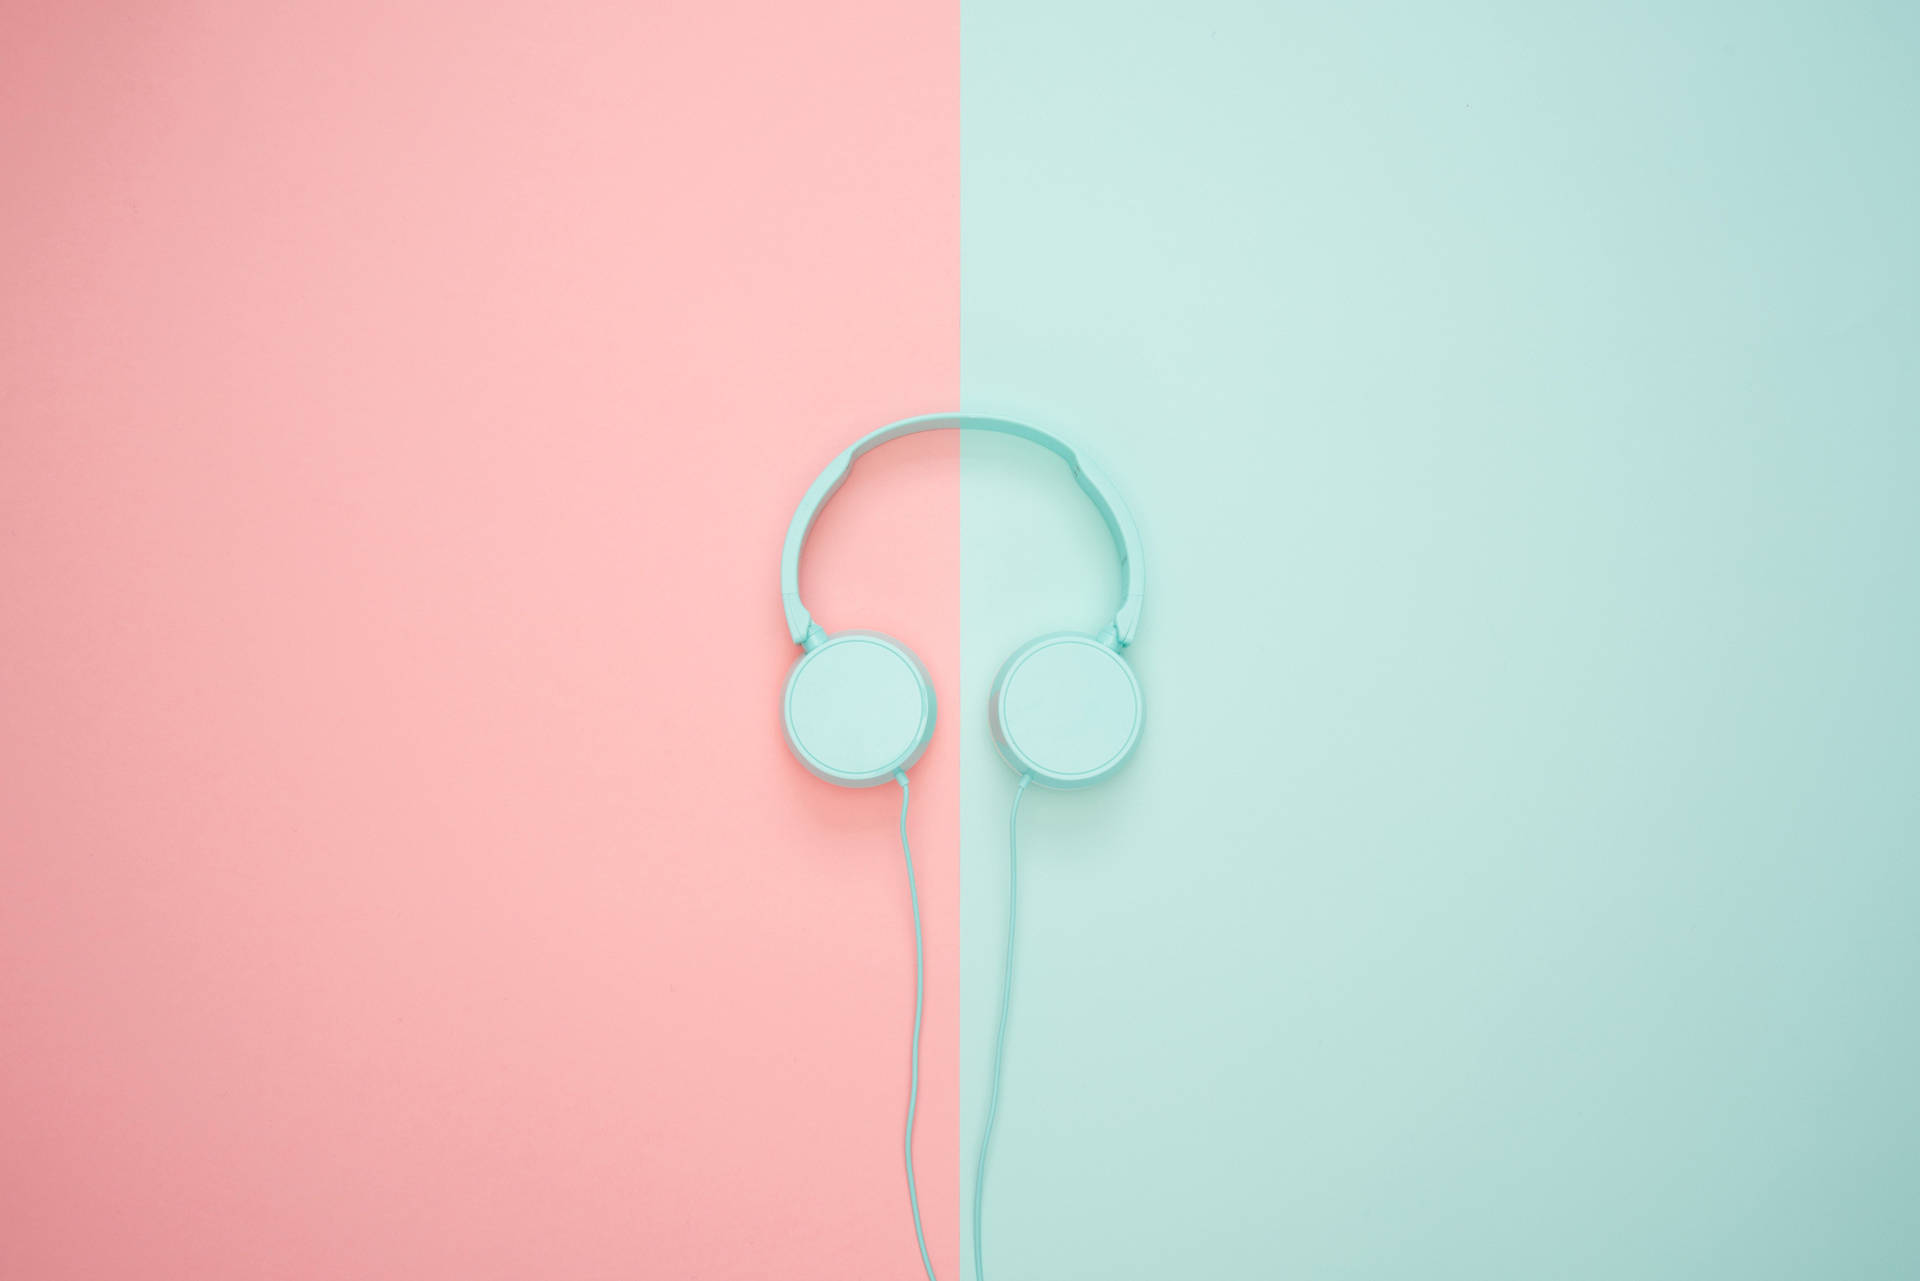 Blue Headset On Pink And Blue Background